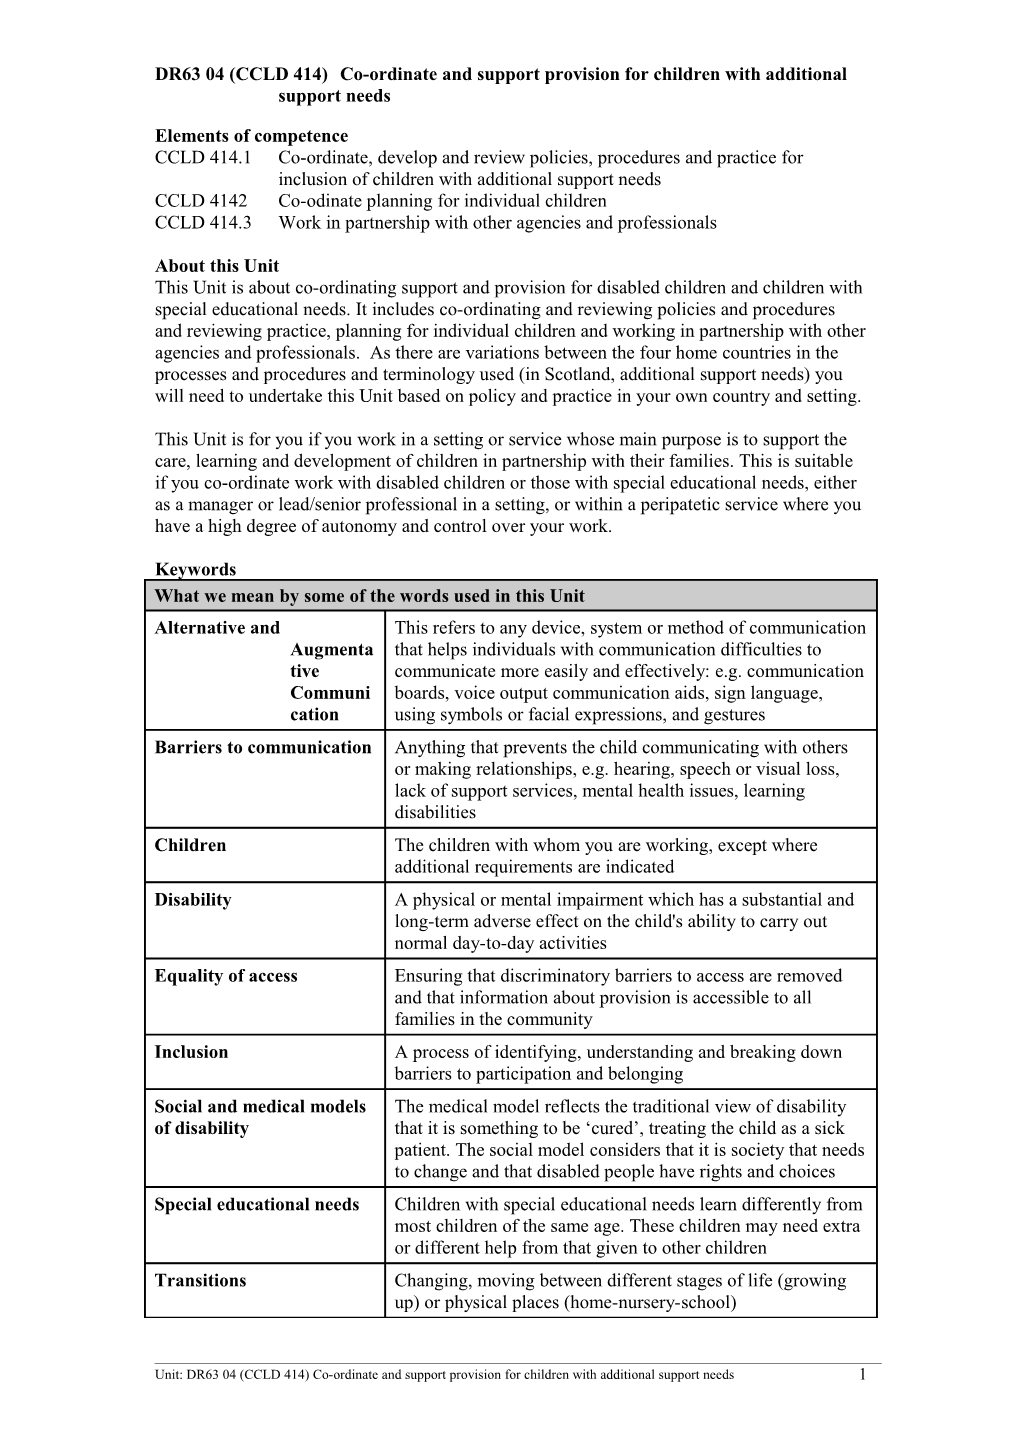 DR63 04 (CCLD 414)Co-Ordinate and Support Provision for Children with Additional Support Needs